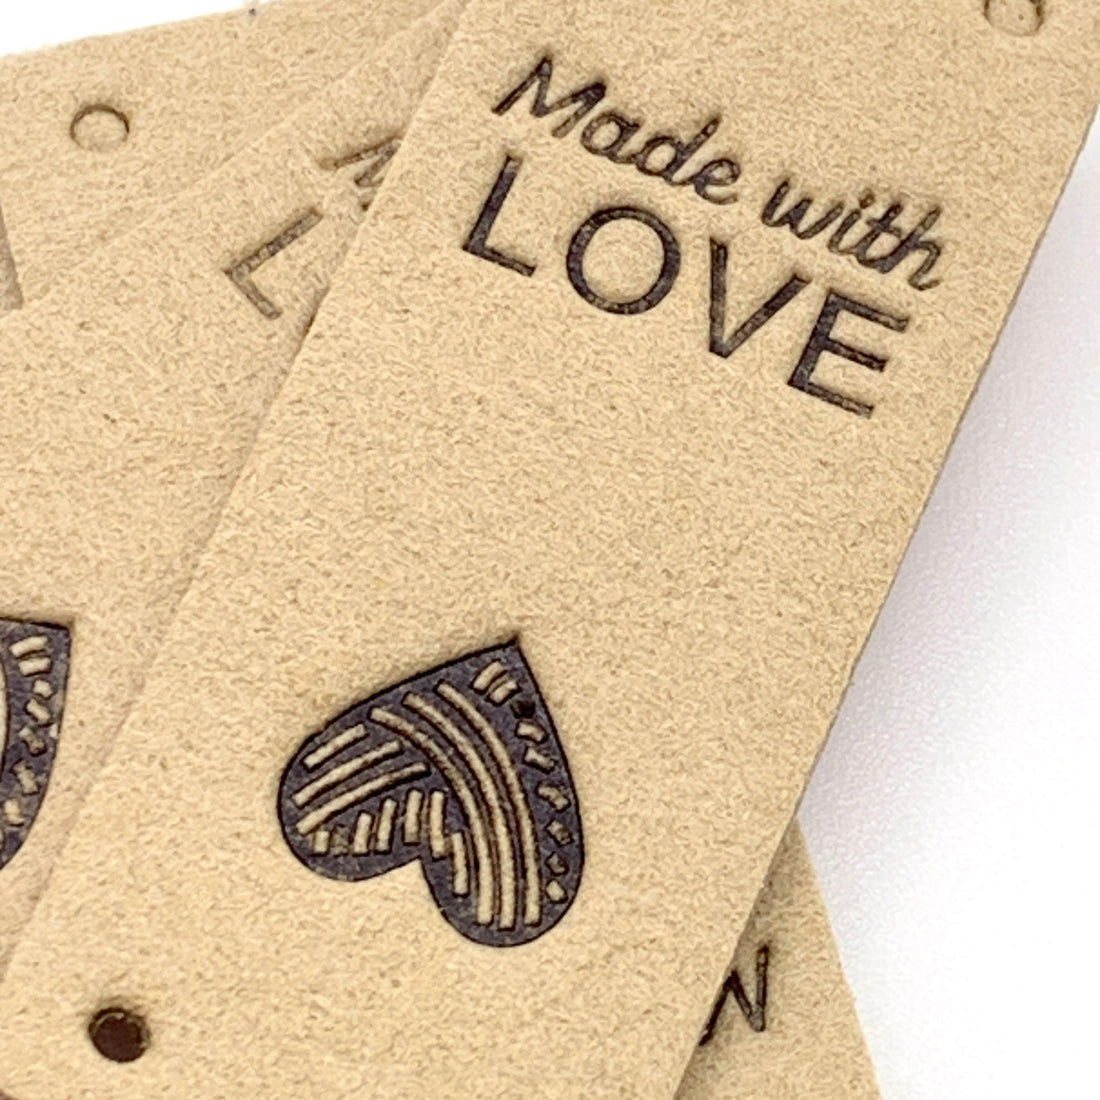 Personalized Faux Suede Tags for Handmade Items - MemorableLand